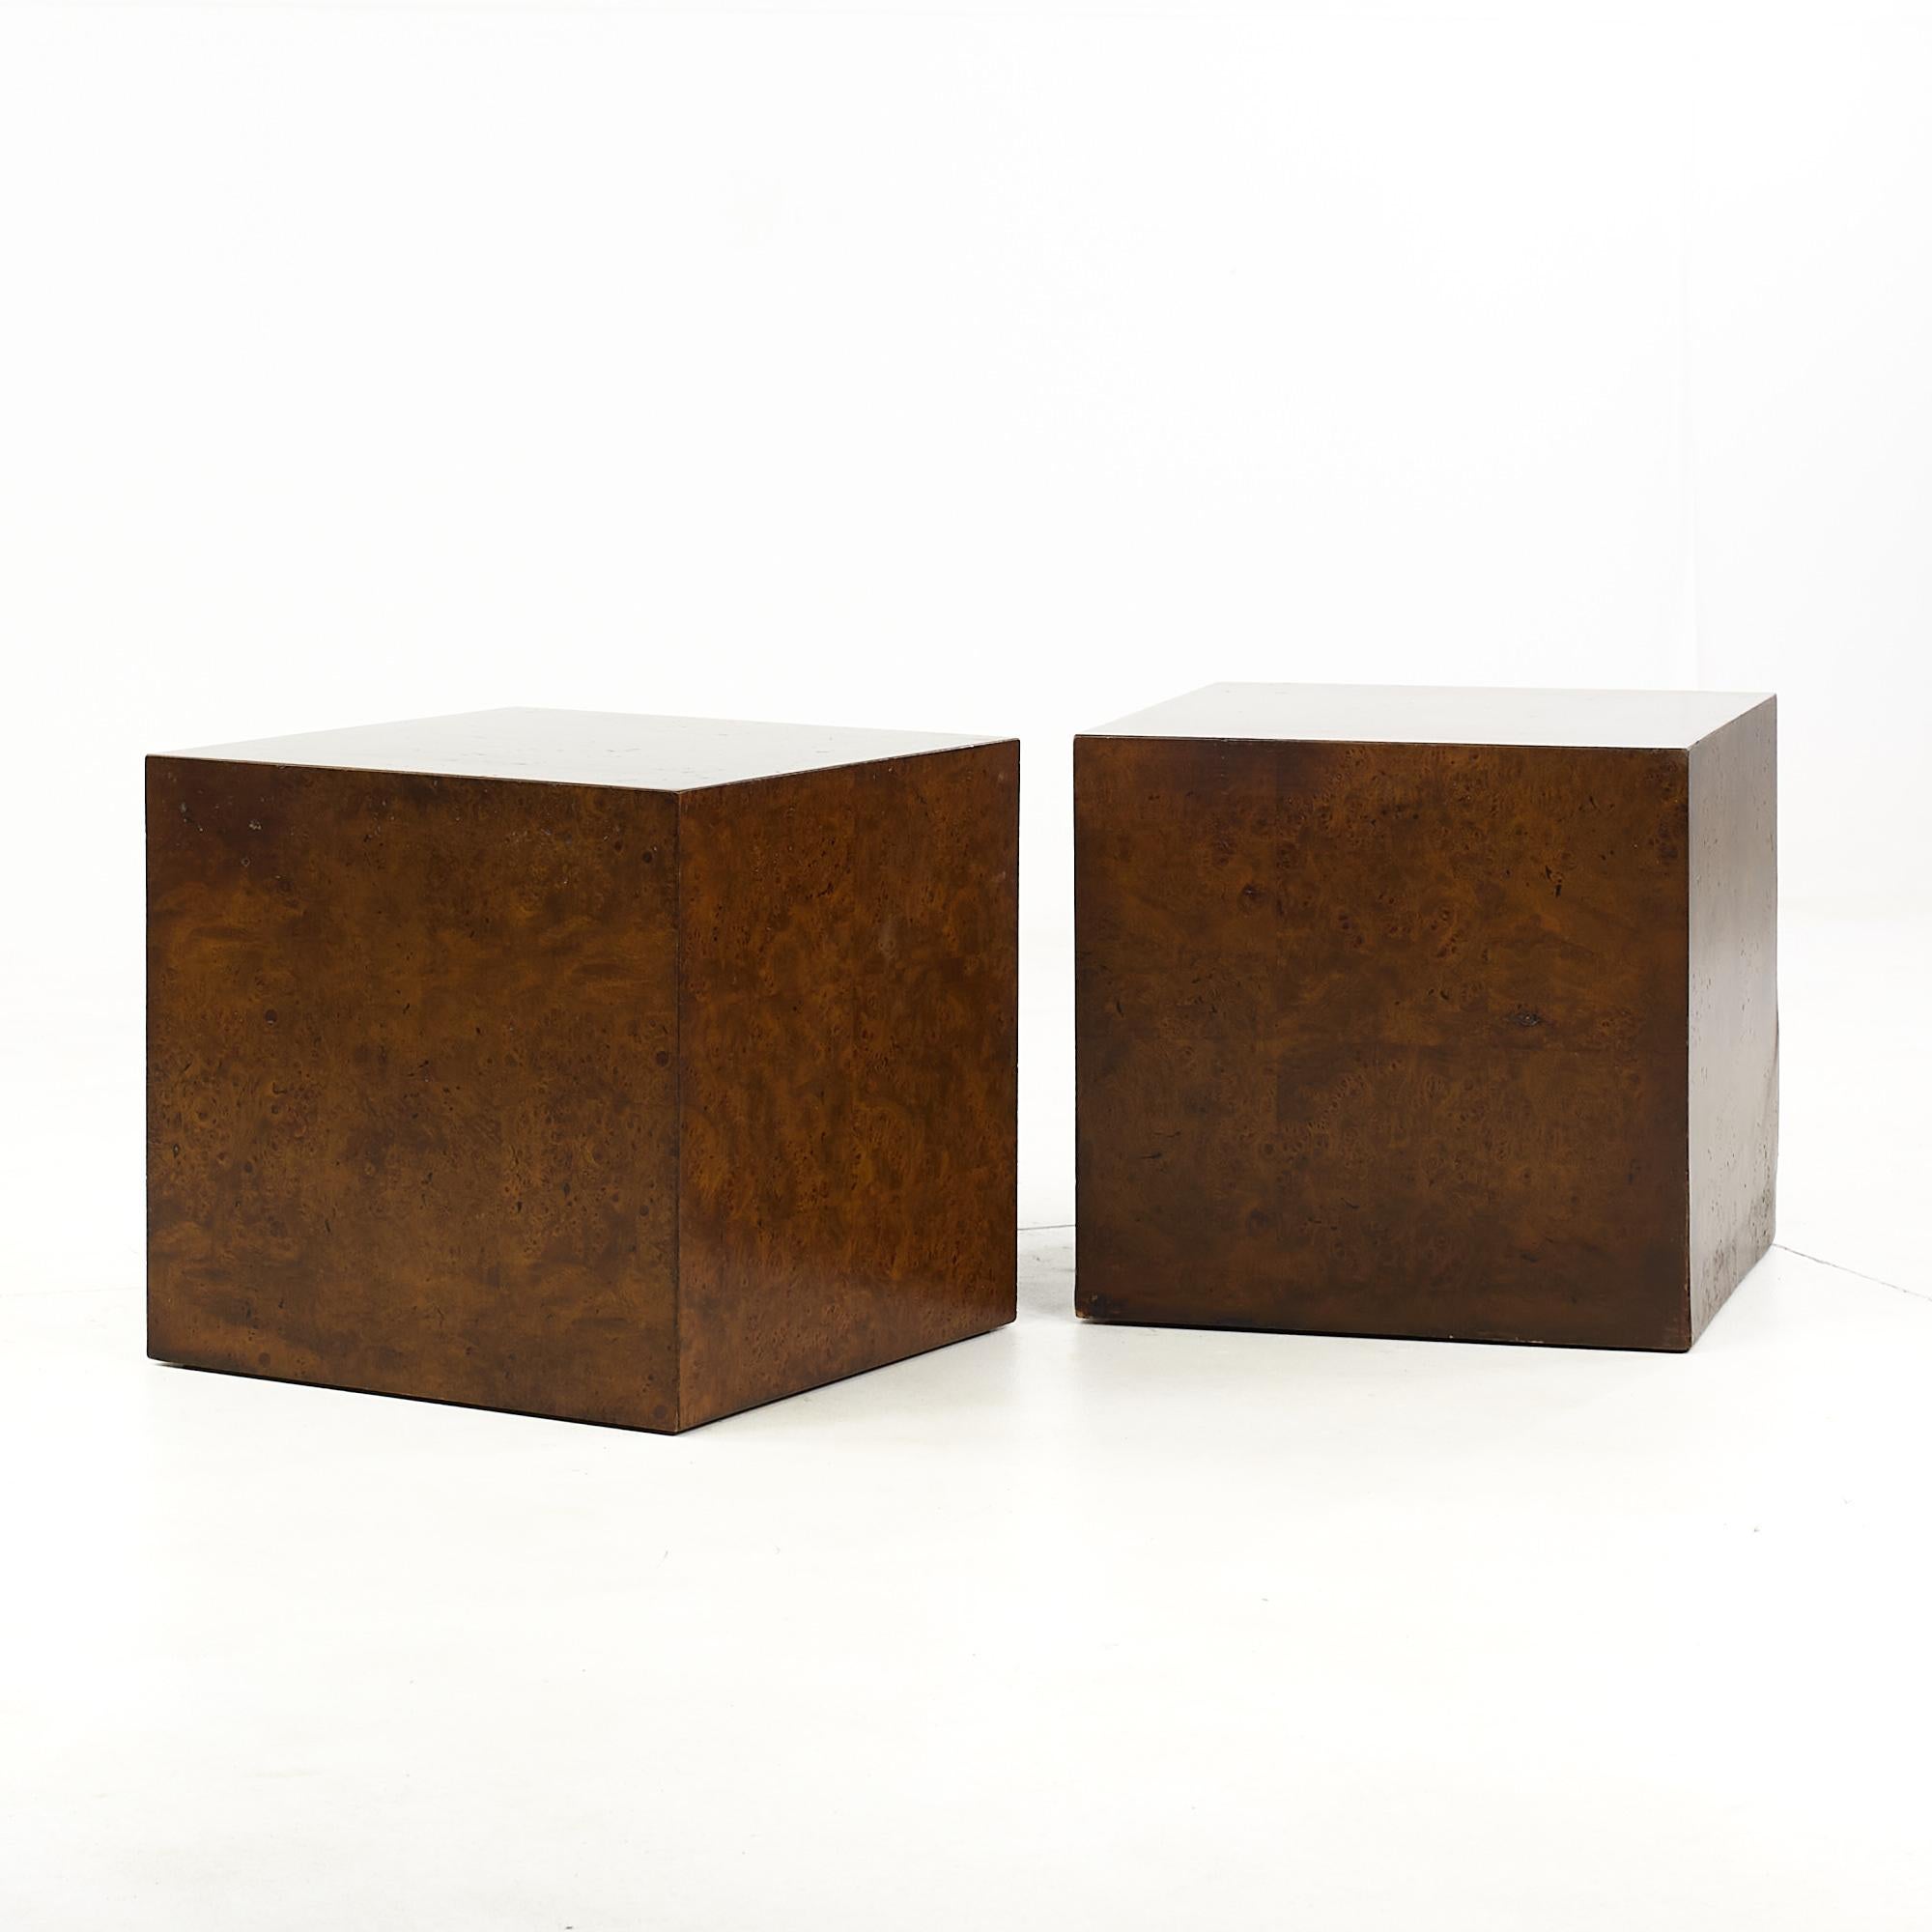 Milo Baughman style mid century burlwood cube side tables

Each table measures 16 wide x 16 deep x 15.5 inches high

All pieces of furniture can be had in what we call restored vintage condition. That means the piece is restored upon purchase so